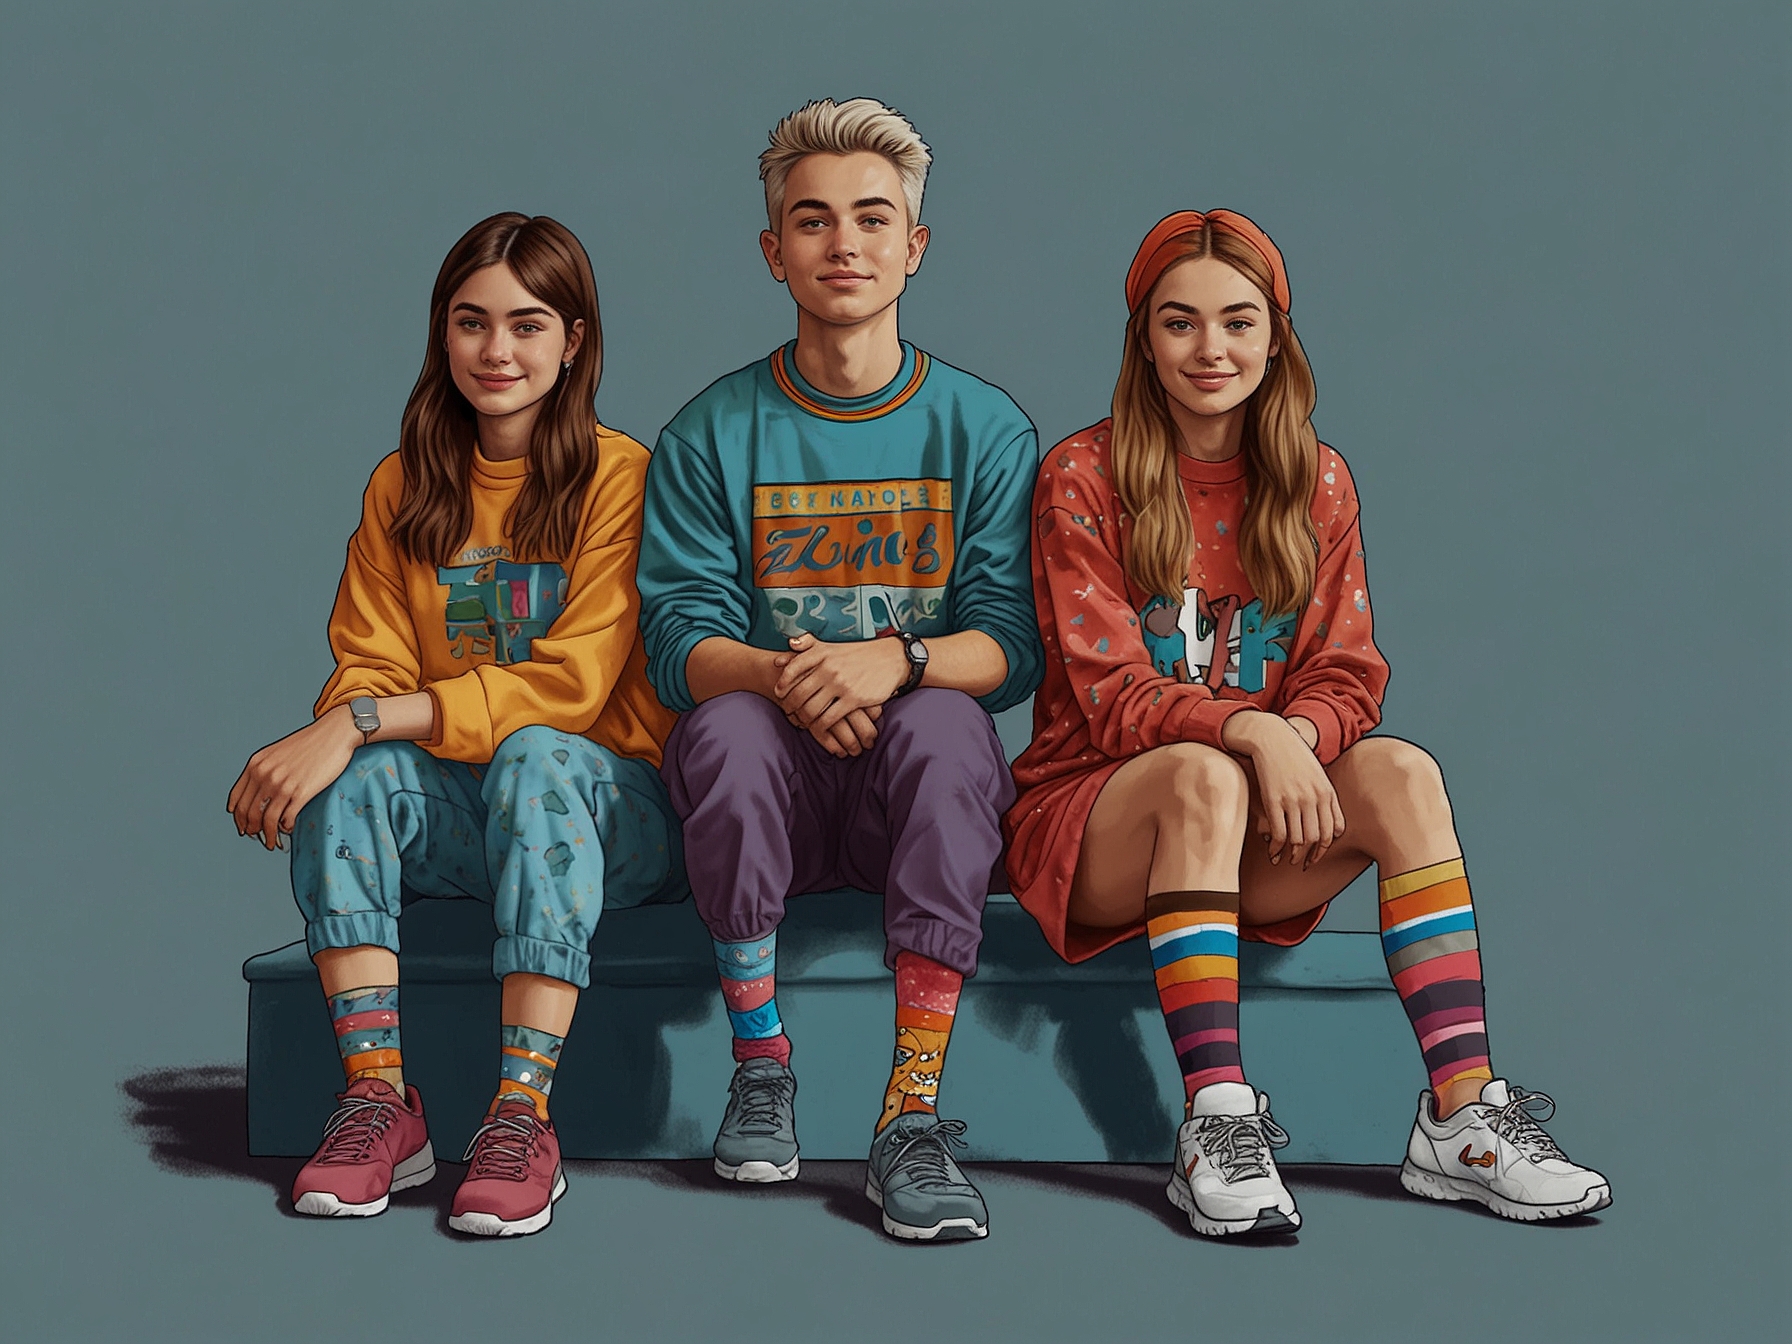 A vibrant depiction of Gen Z fashion enthusiasts wearing crew socks adorned with colorful patterns and logos, symbolizing their bold and expressive style.